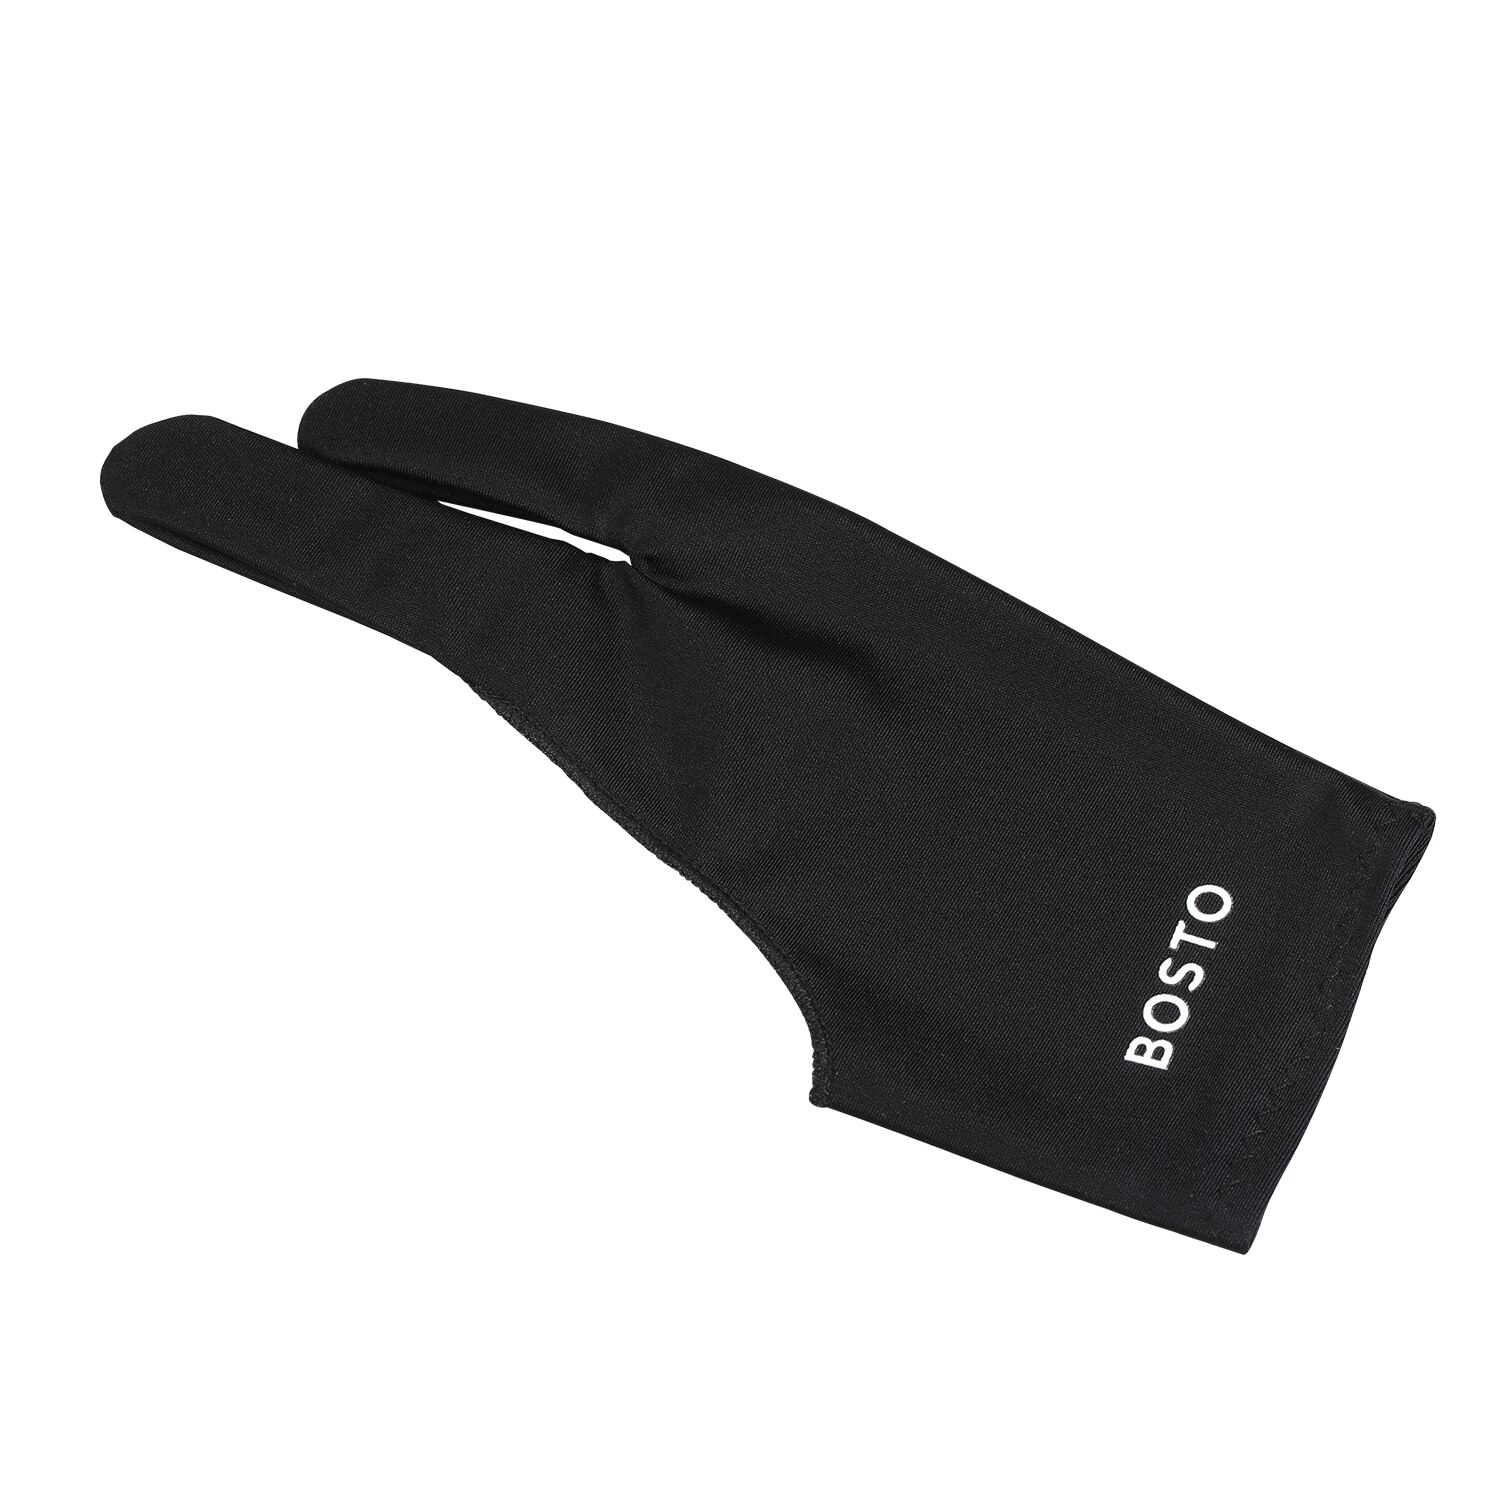 Tablet Drawing Glove Two-Finger Free Size Drawing Glove Artist for BOSTO/UGEE/Huion/Wacom Graphics Drawing Tablets